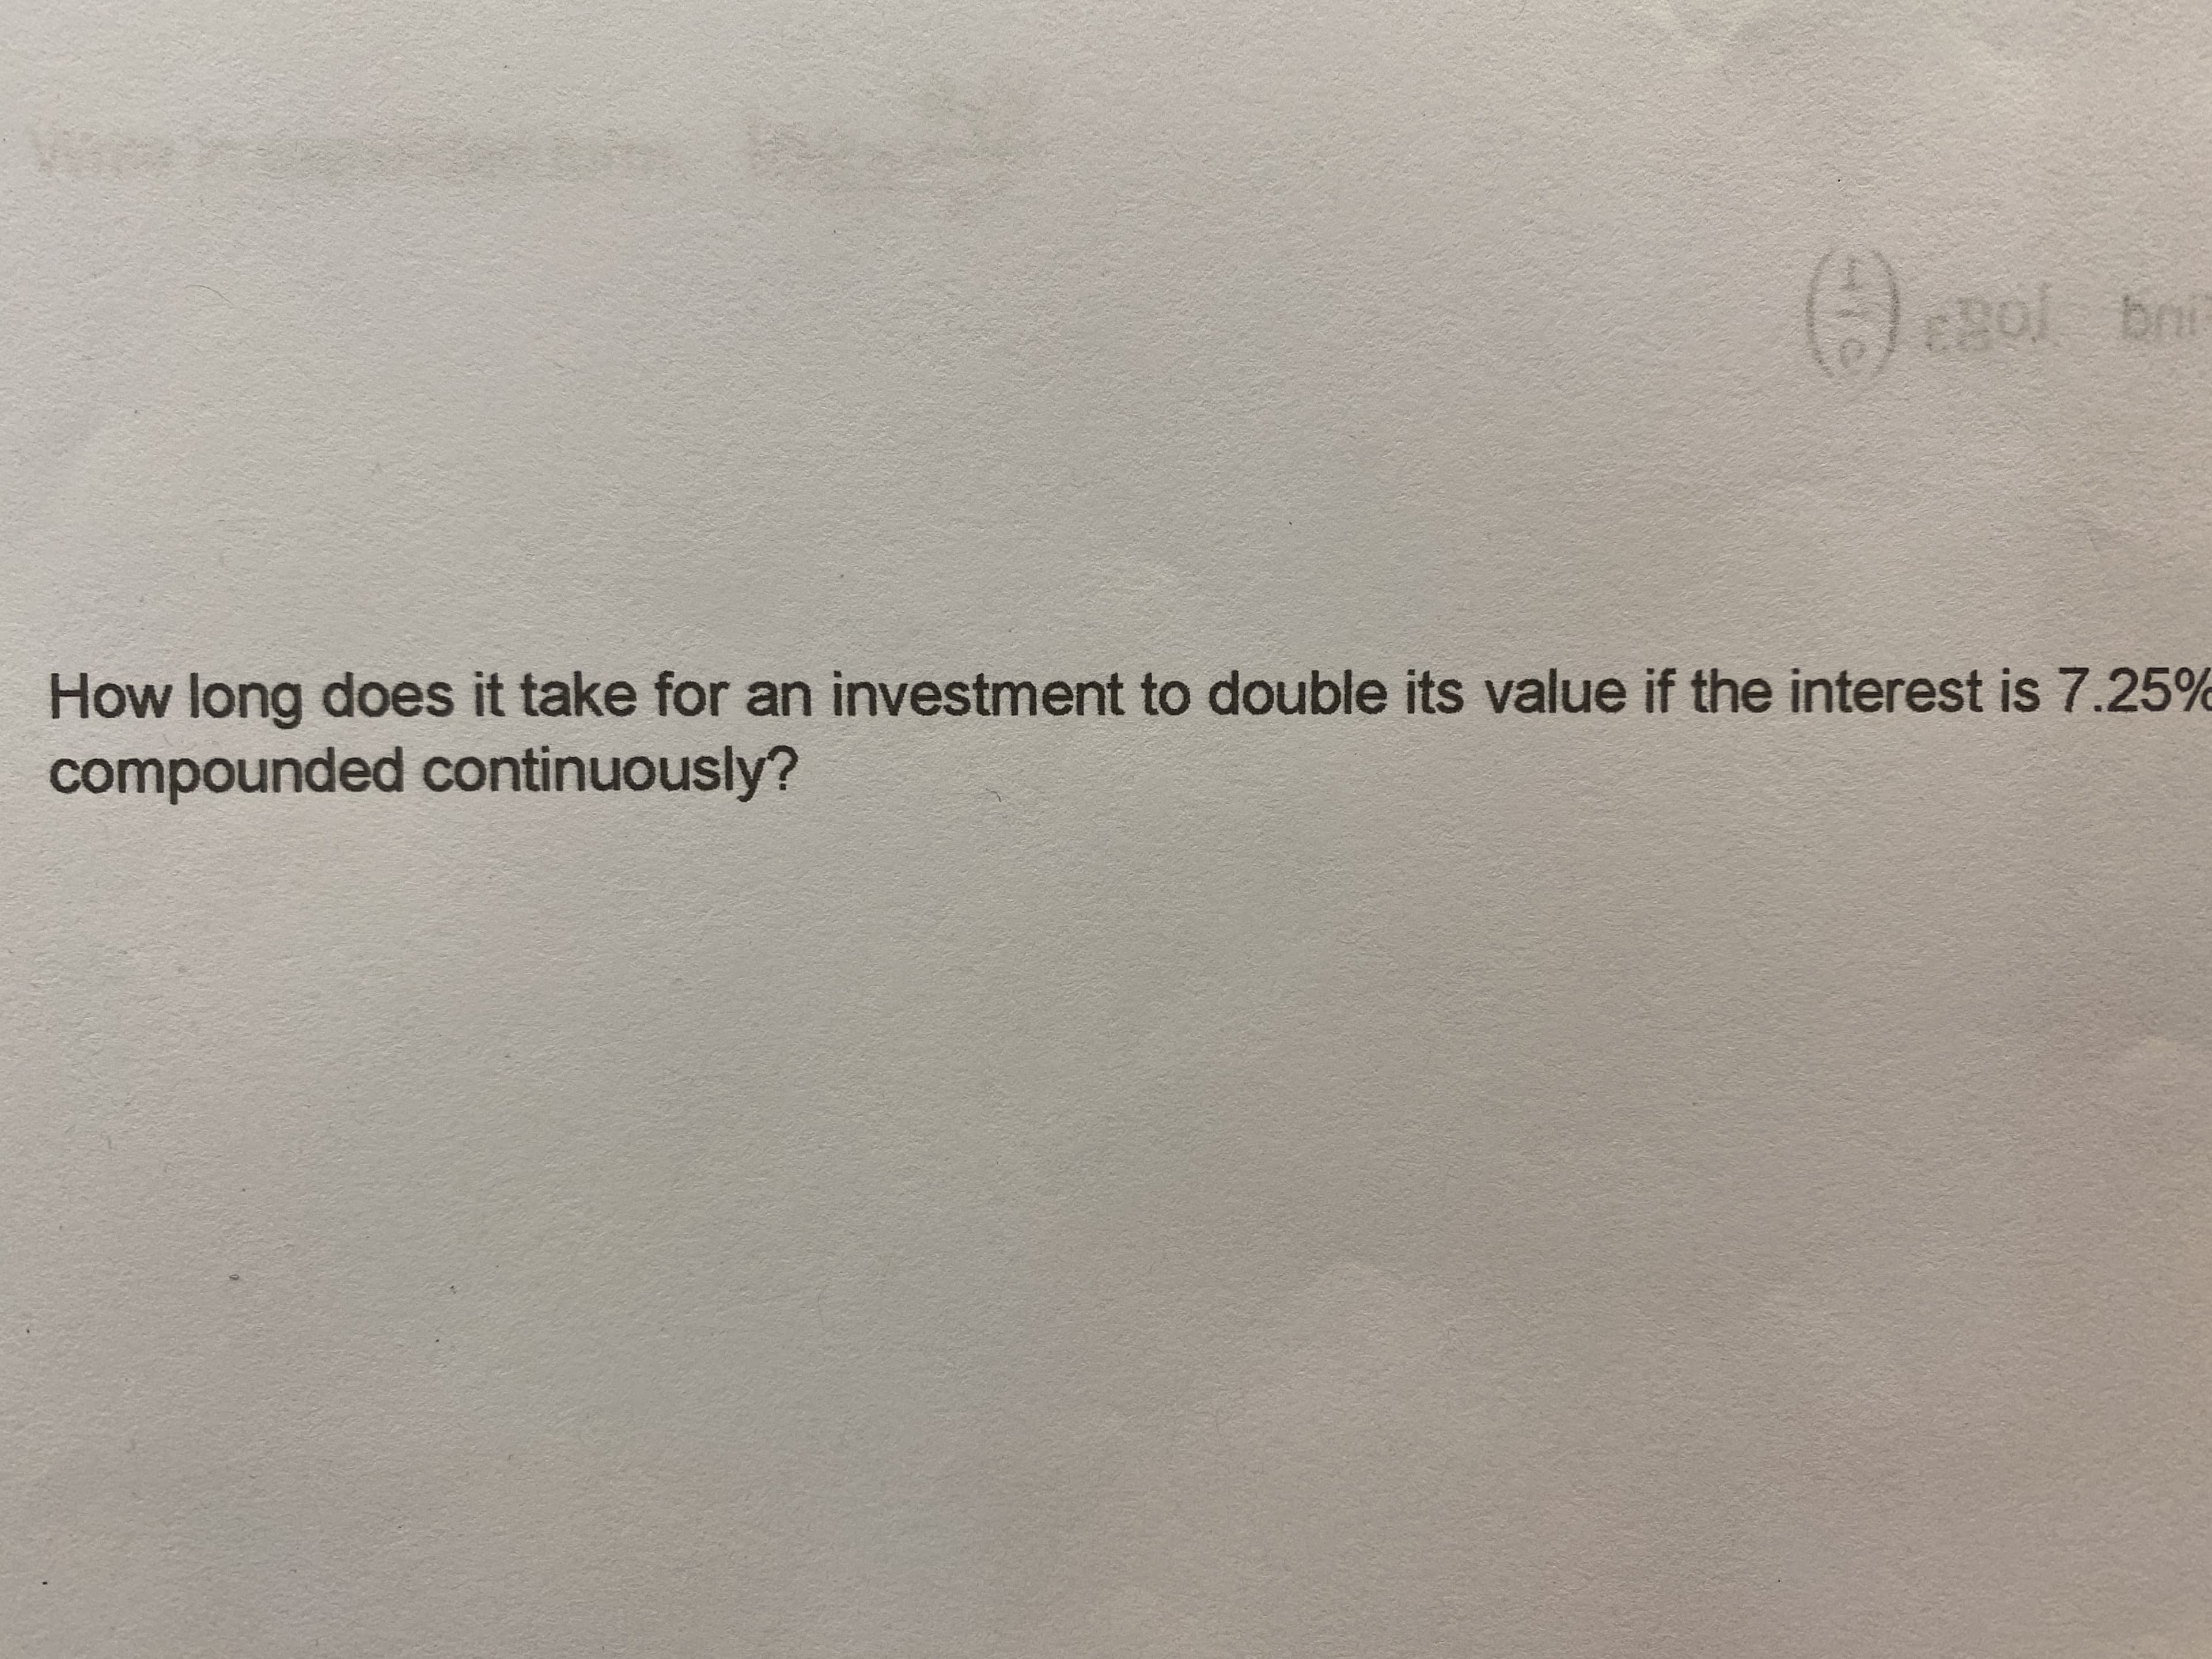 How long does it take for an investment to double its value if the interest is 7.25%
compounded continuously?
